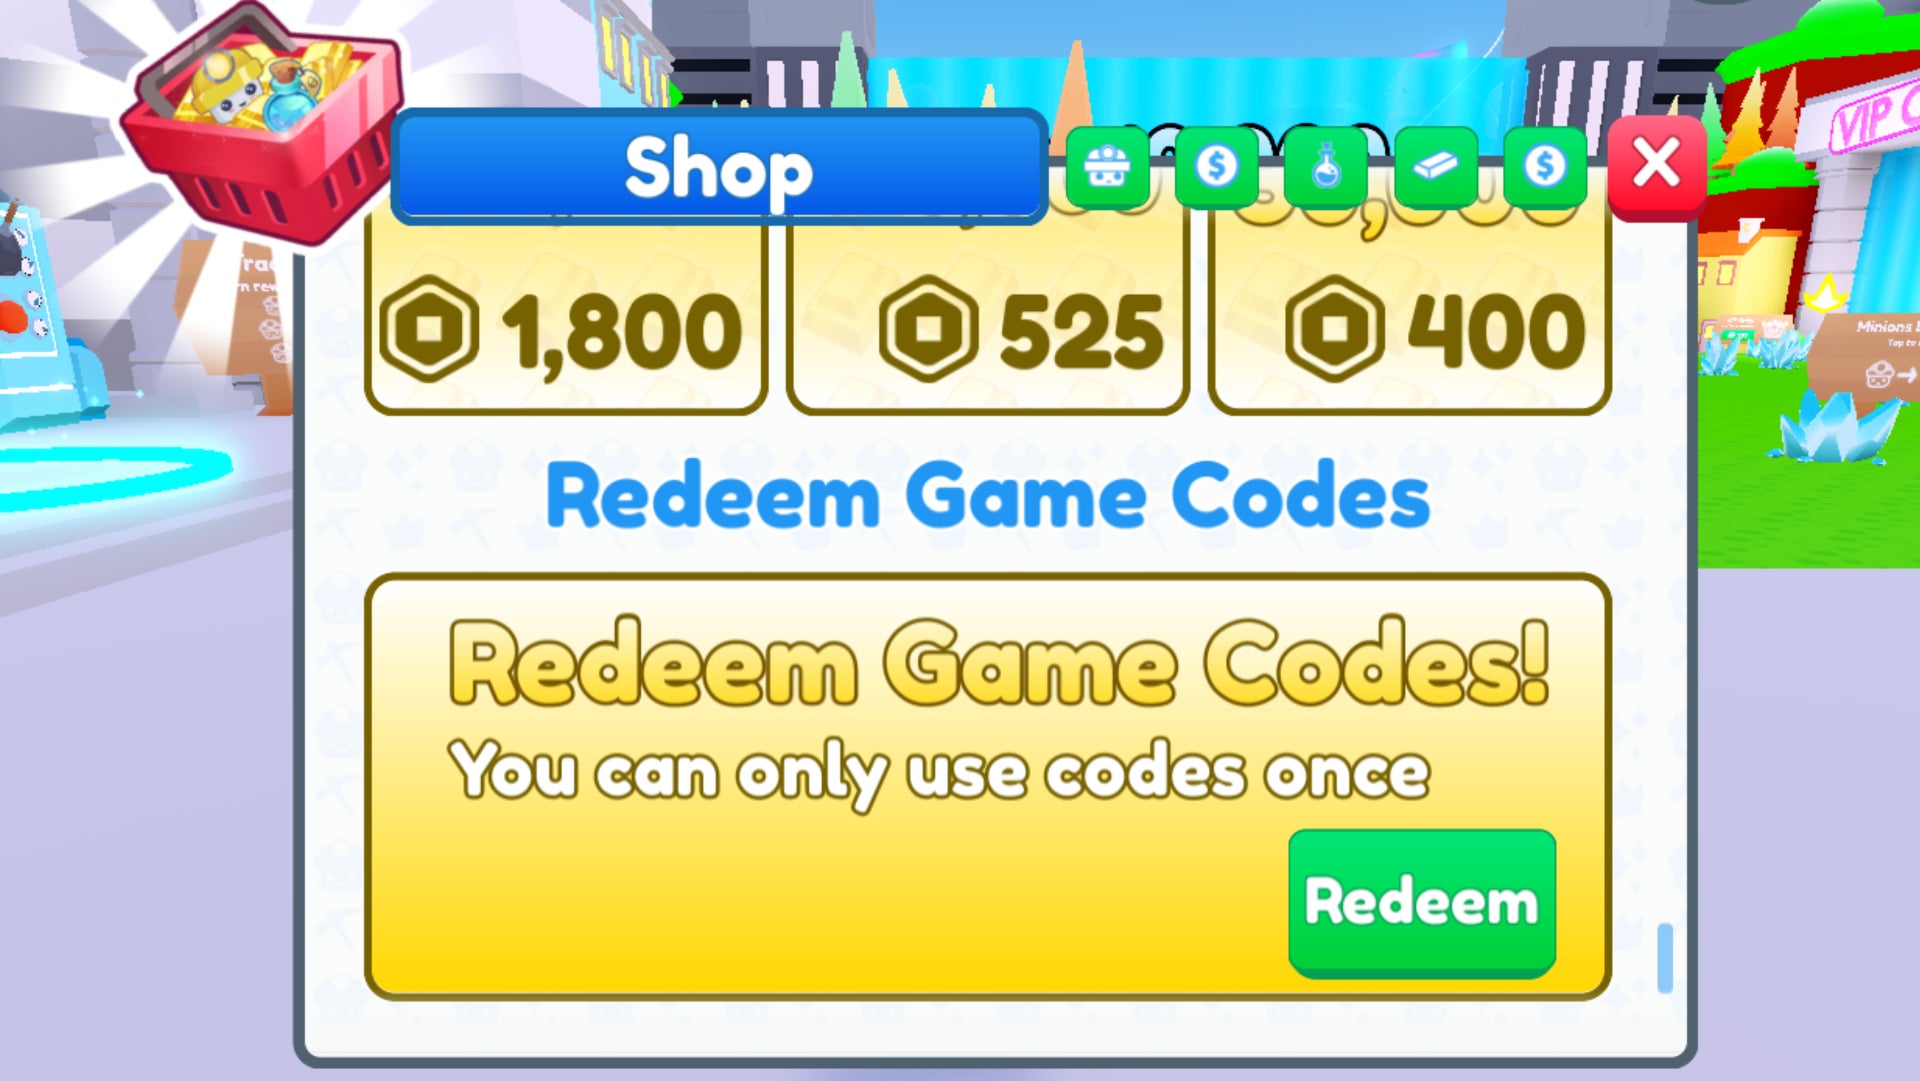 Minion Simulator shop menu, the redeem game codes section is in the center of a yellow window.